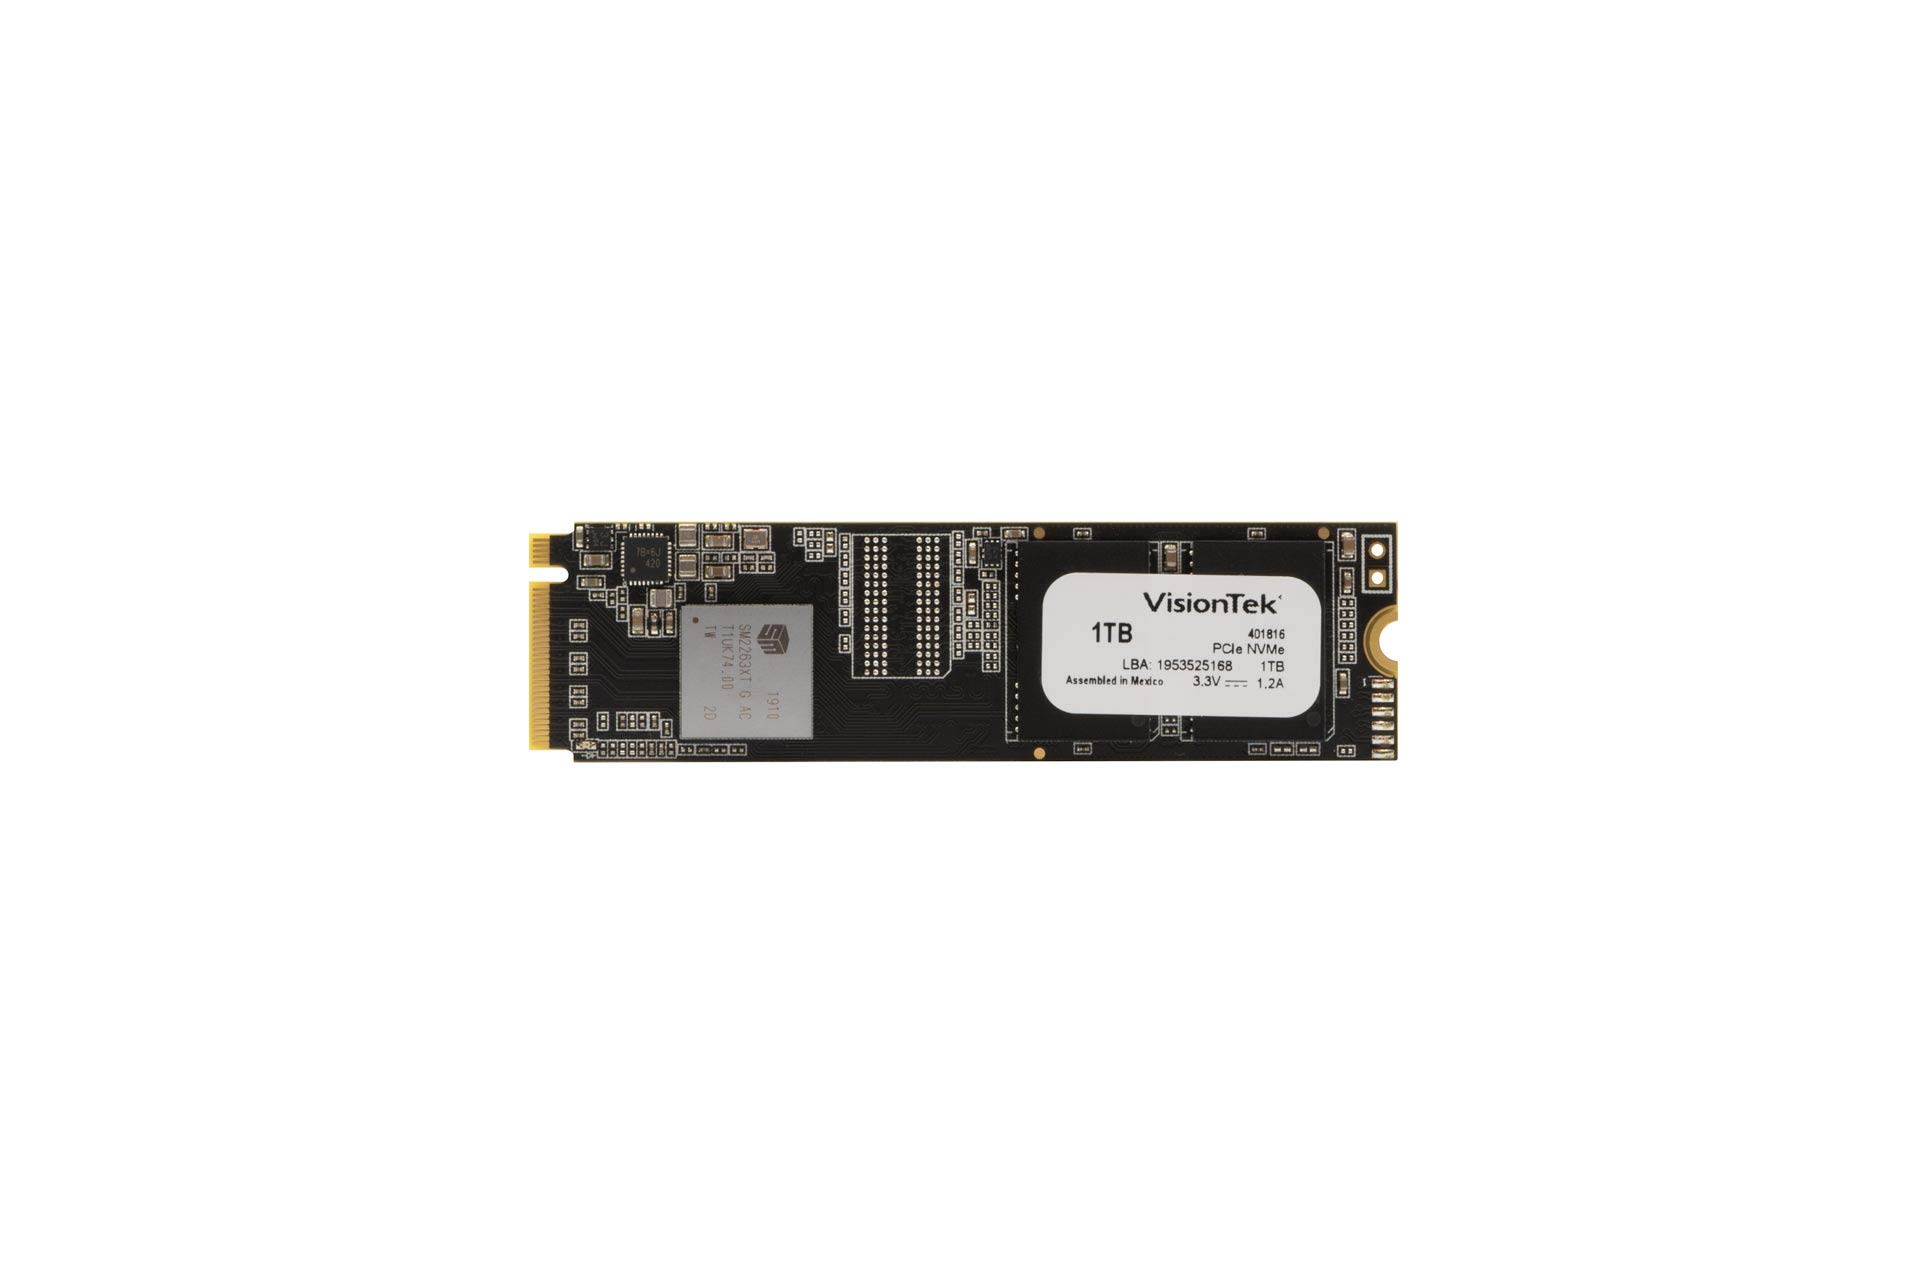 VisionTek 1TB PRO XMN M.2 NVMe Internal Solid State Drive with 3D NAND Technology for Desktop Computers Laptops and Mac Syst